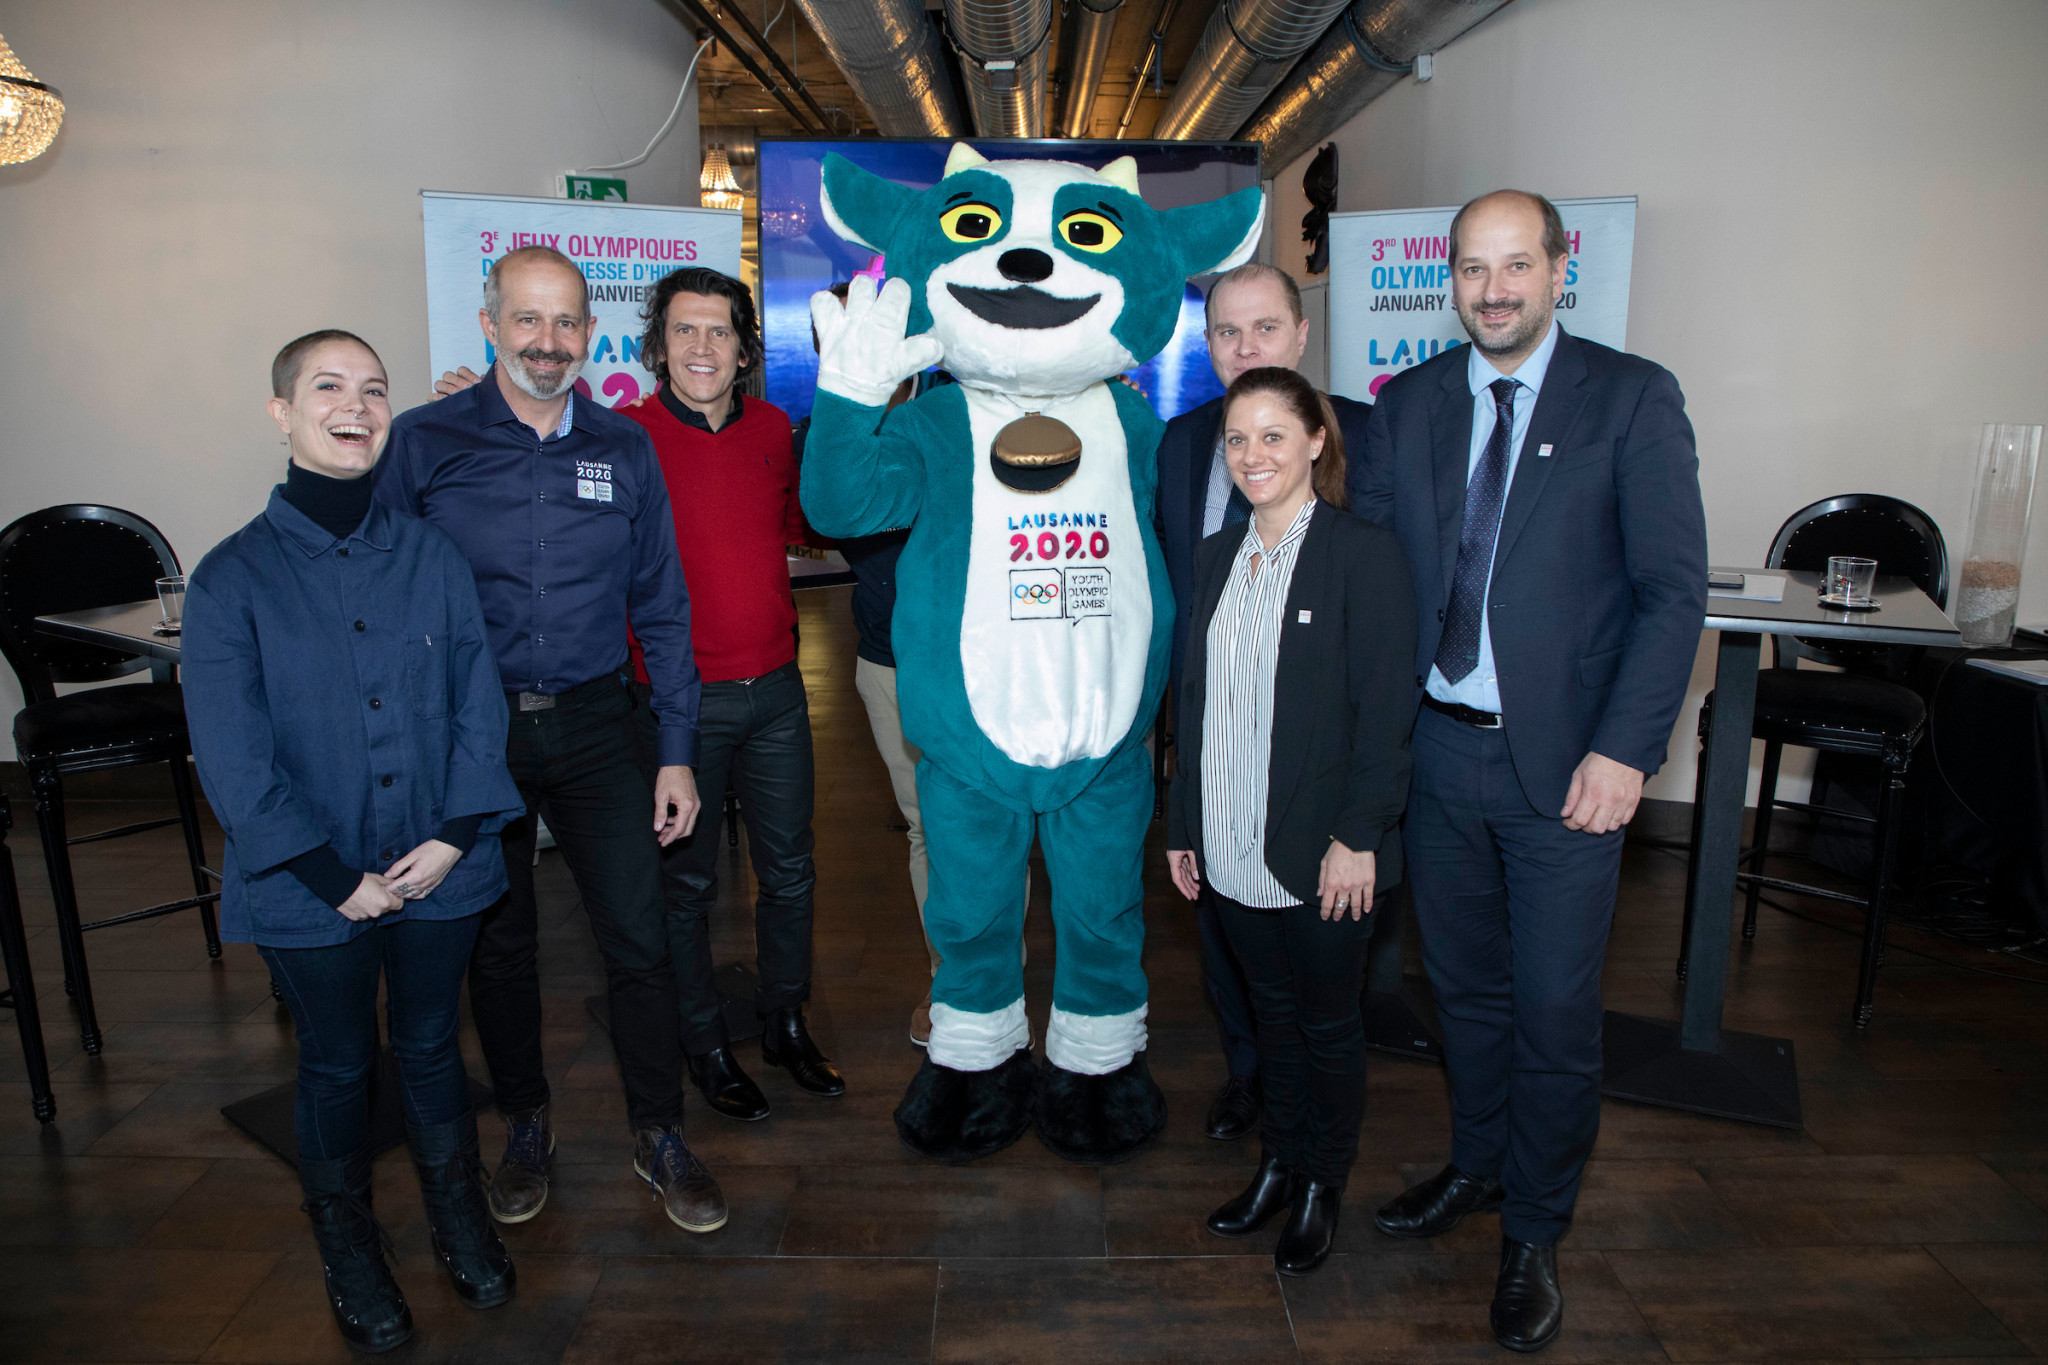 IOC and Lausanne 2020 officials promised the event would be a success ©IOC